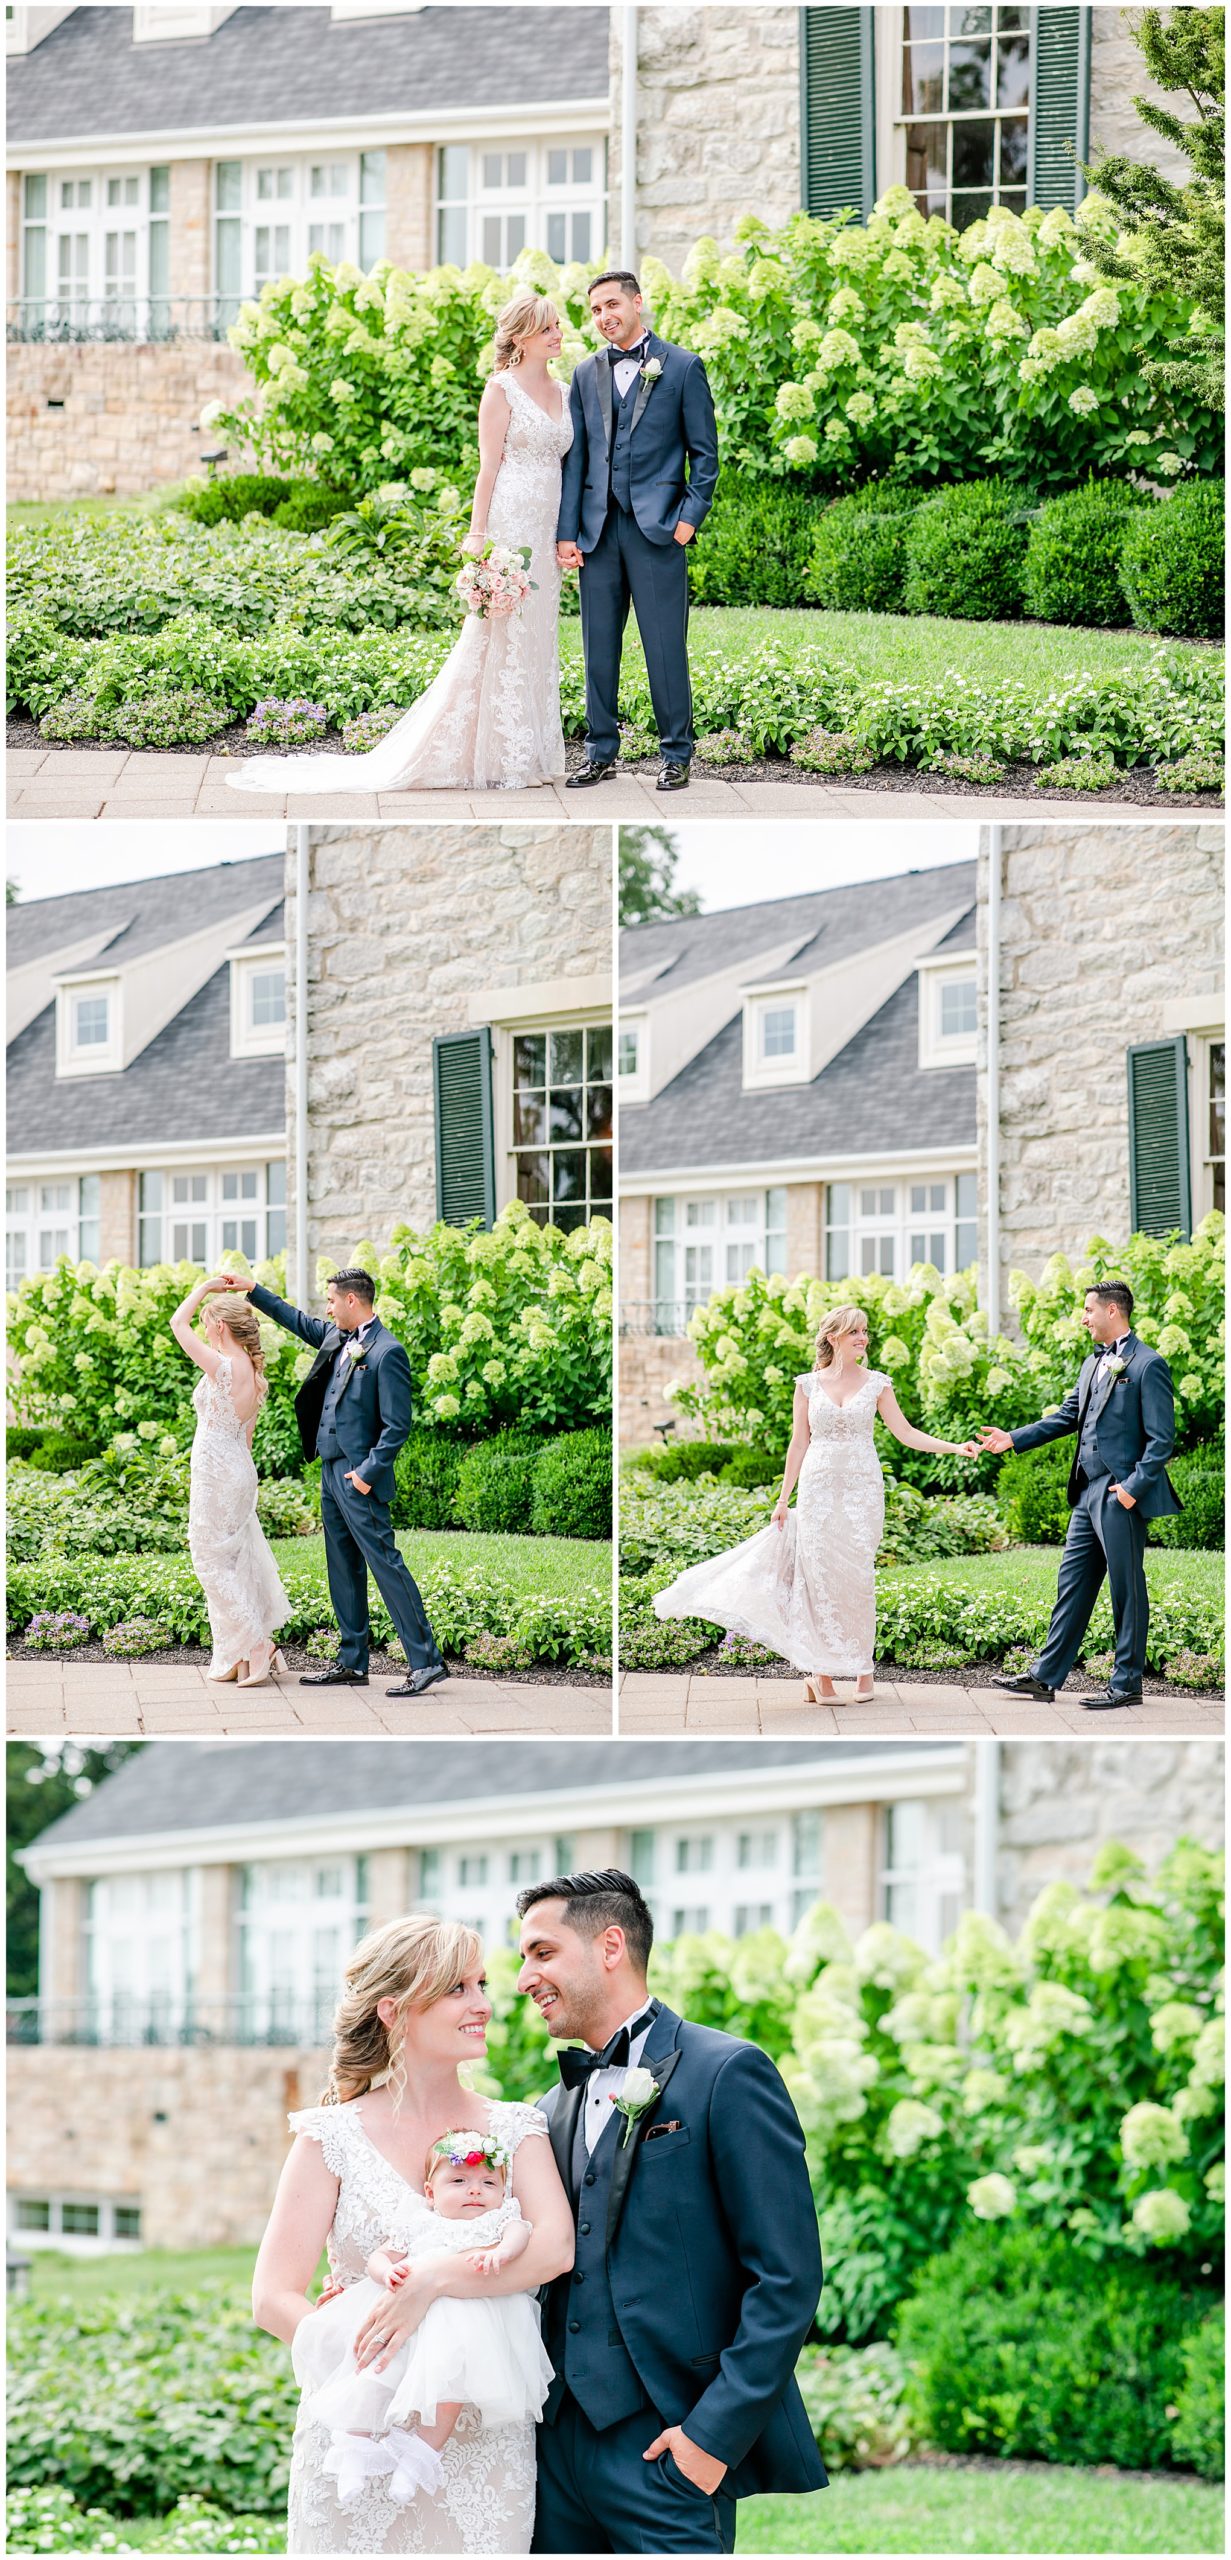 mid-summer Hayfields Country Club, Hunt Valley wedding, Baltimore wedding photographer, Rachel E.H. Photography, DC wedding photographer, summer wedding, pink and navy aesthetic, Washington DC wedding photography, Baltimore wedding photography, hydrangea, newlywed portraits, couple dancing